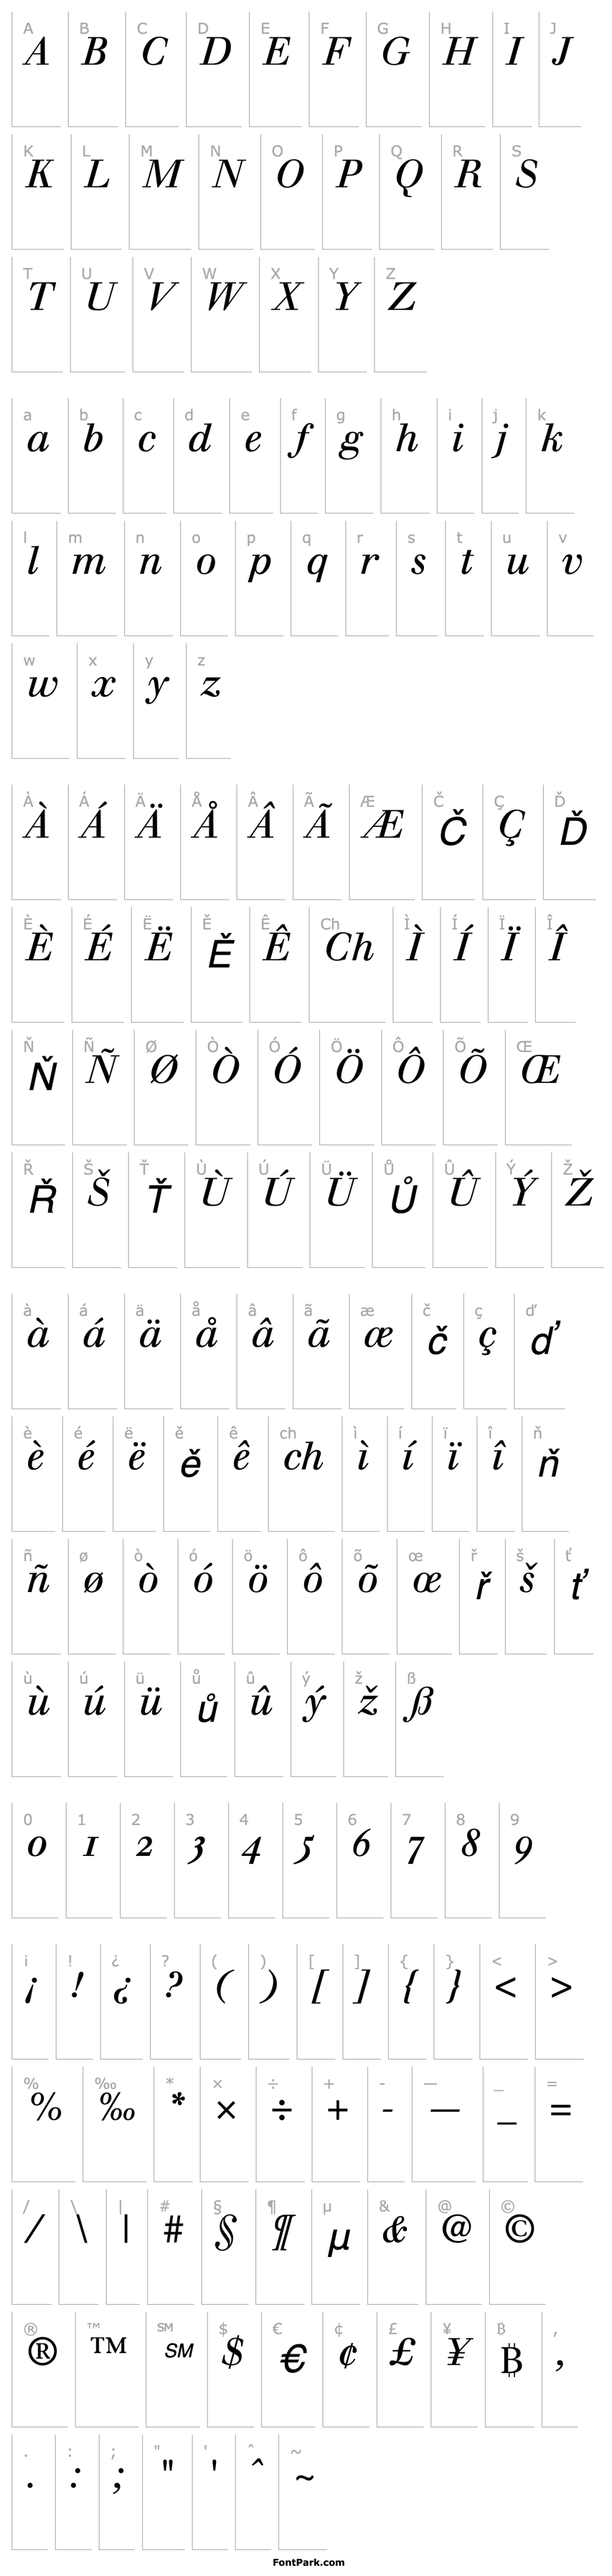 Overview Walbaum OldStyle SSi Italic Oldstyle Figures